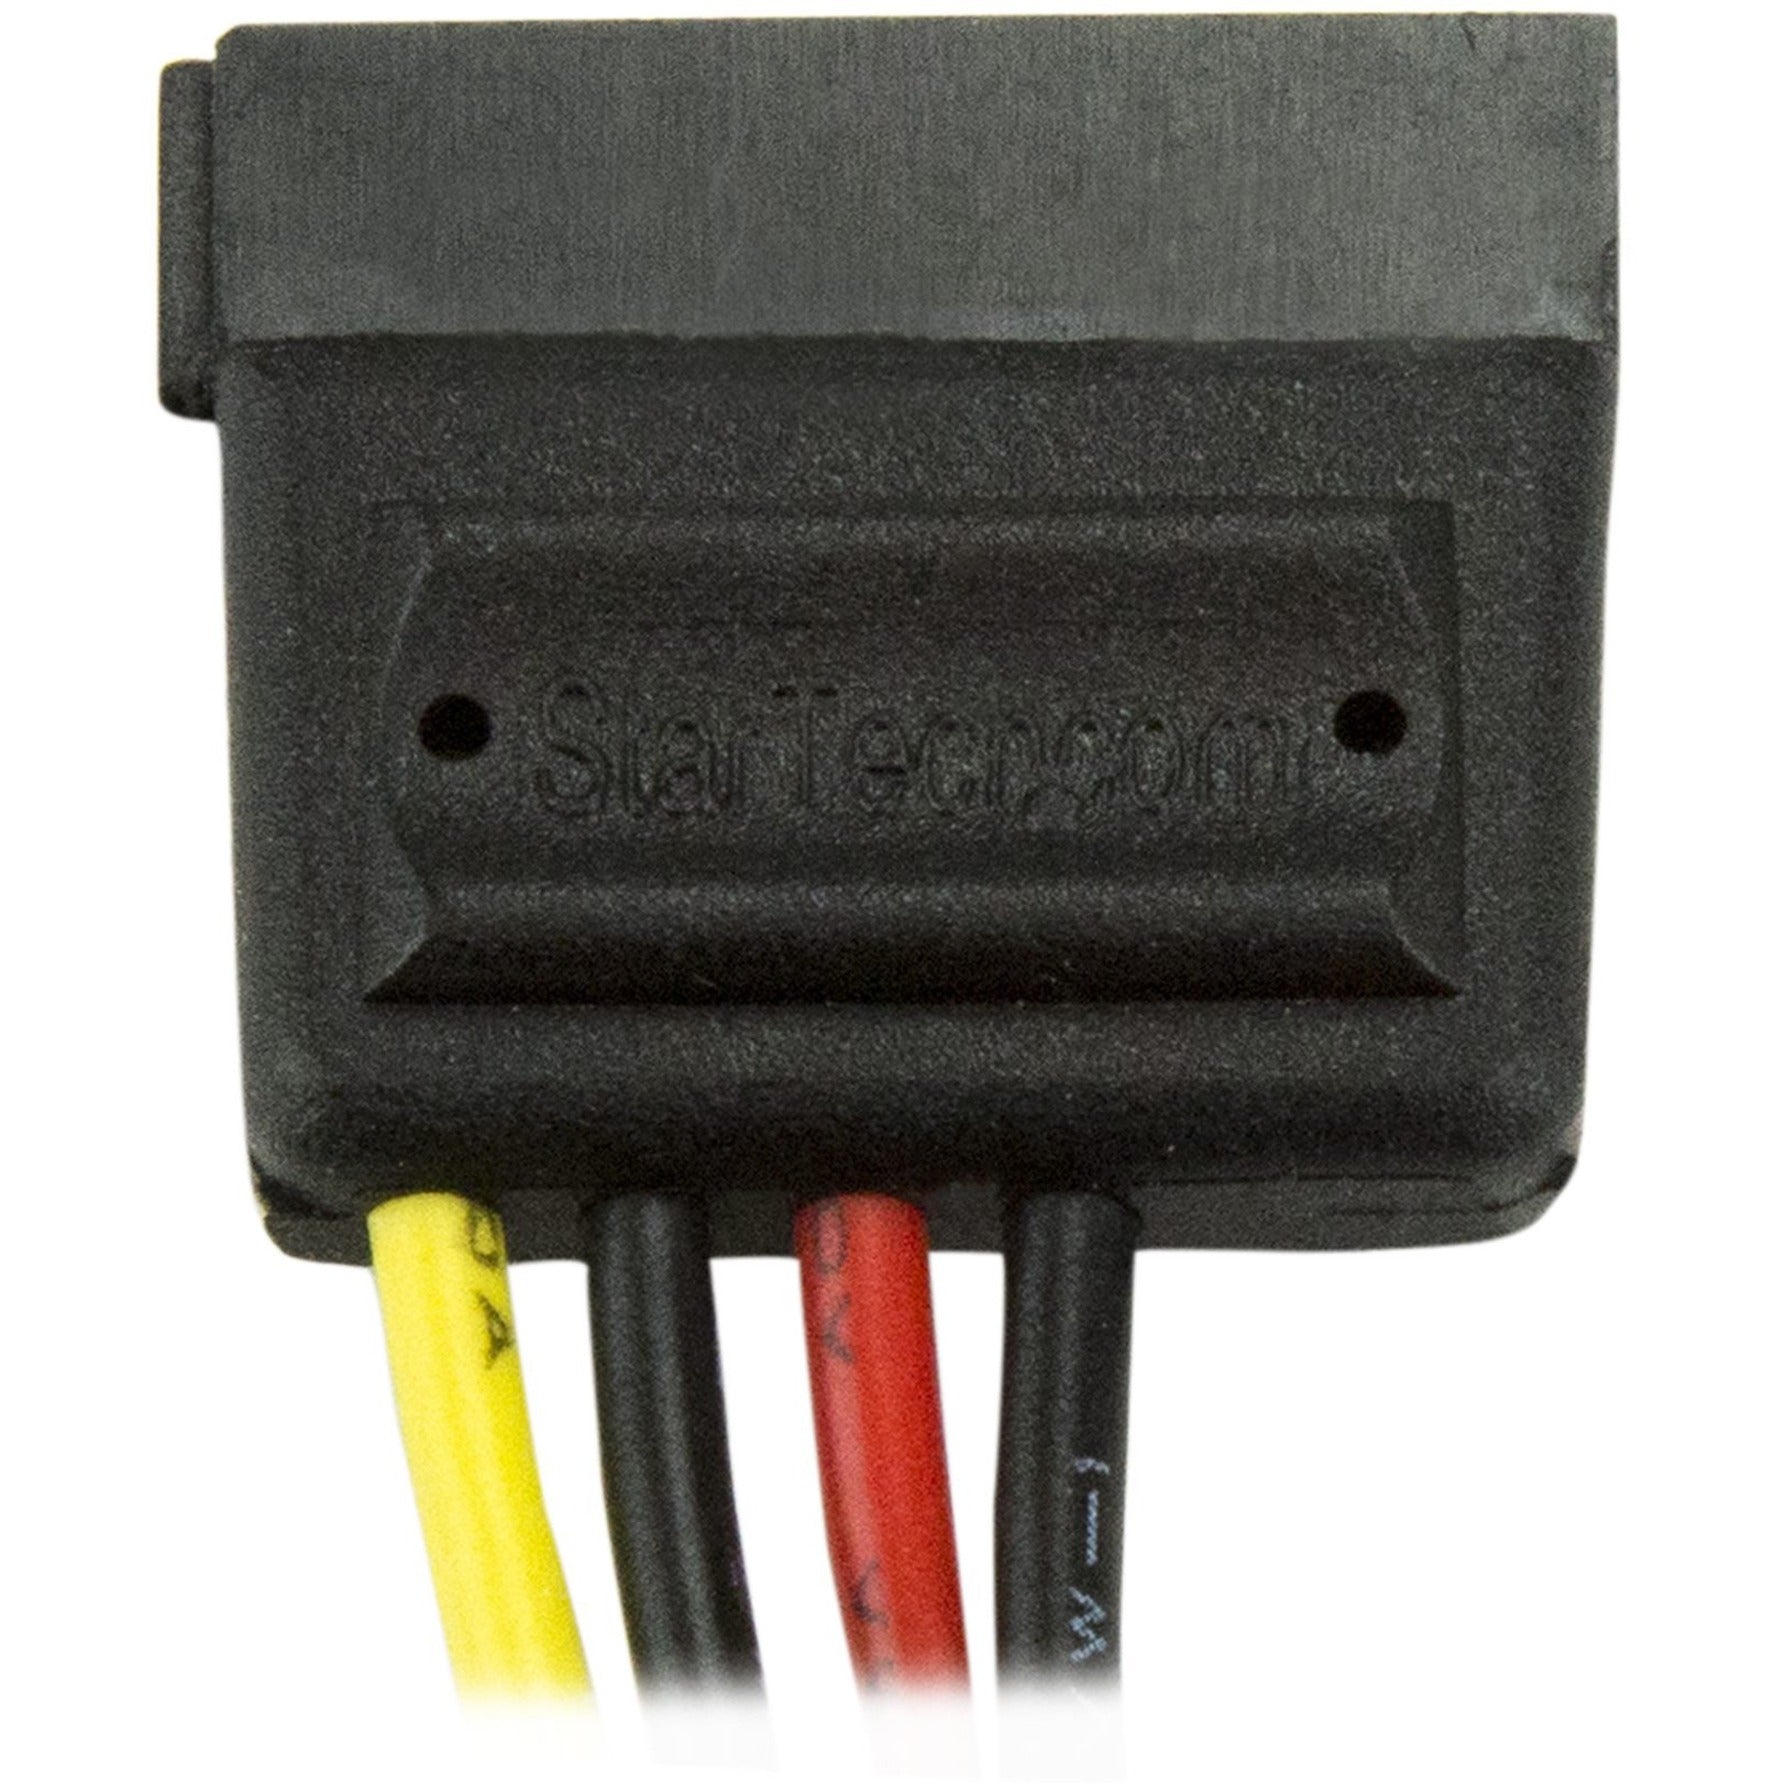 StarTech.com SATAPOWADAP 6in 4 Pin Molex to SATA Power Cable Adapter, Connect Your Hard Drive Effortlessly